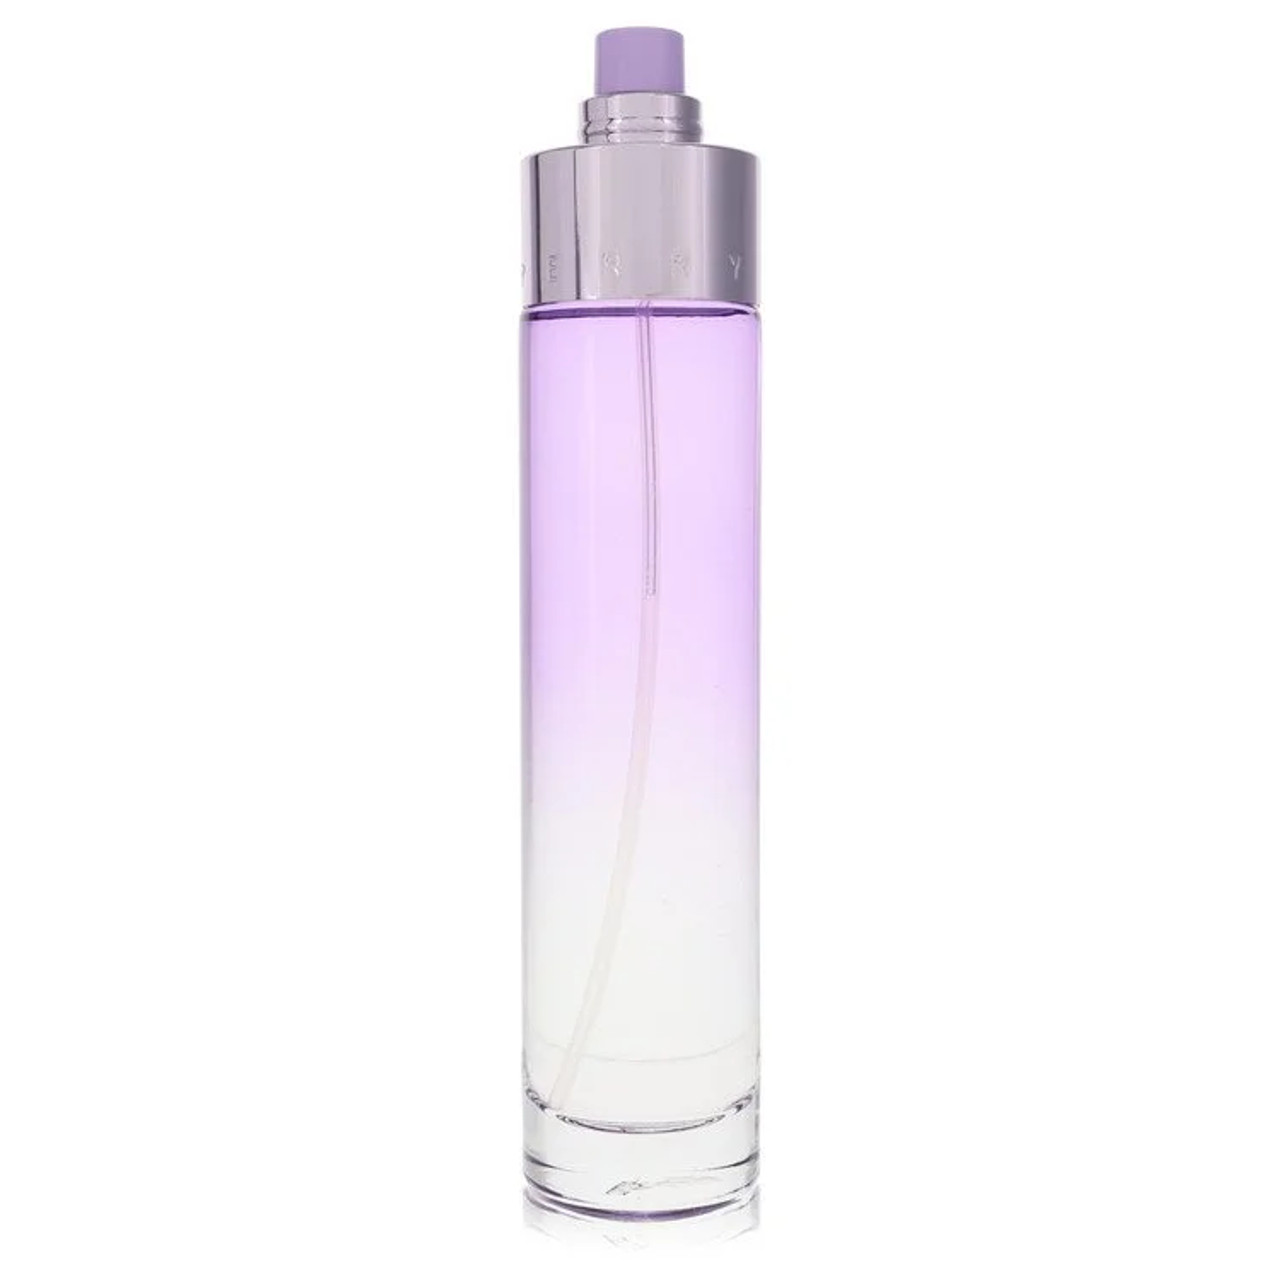 Perry Ellis 360 Purple Perfume By Perry Ellis Eau De Parfum Spray 3.4 oz (Tester) for Women - [From 58.00 - Choose pk Qty ] - *Ships from Miami